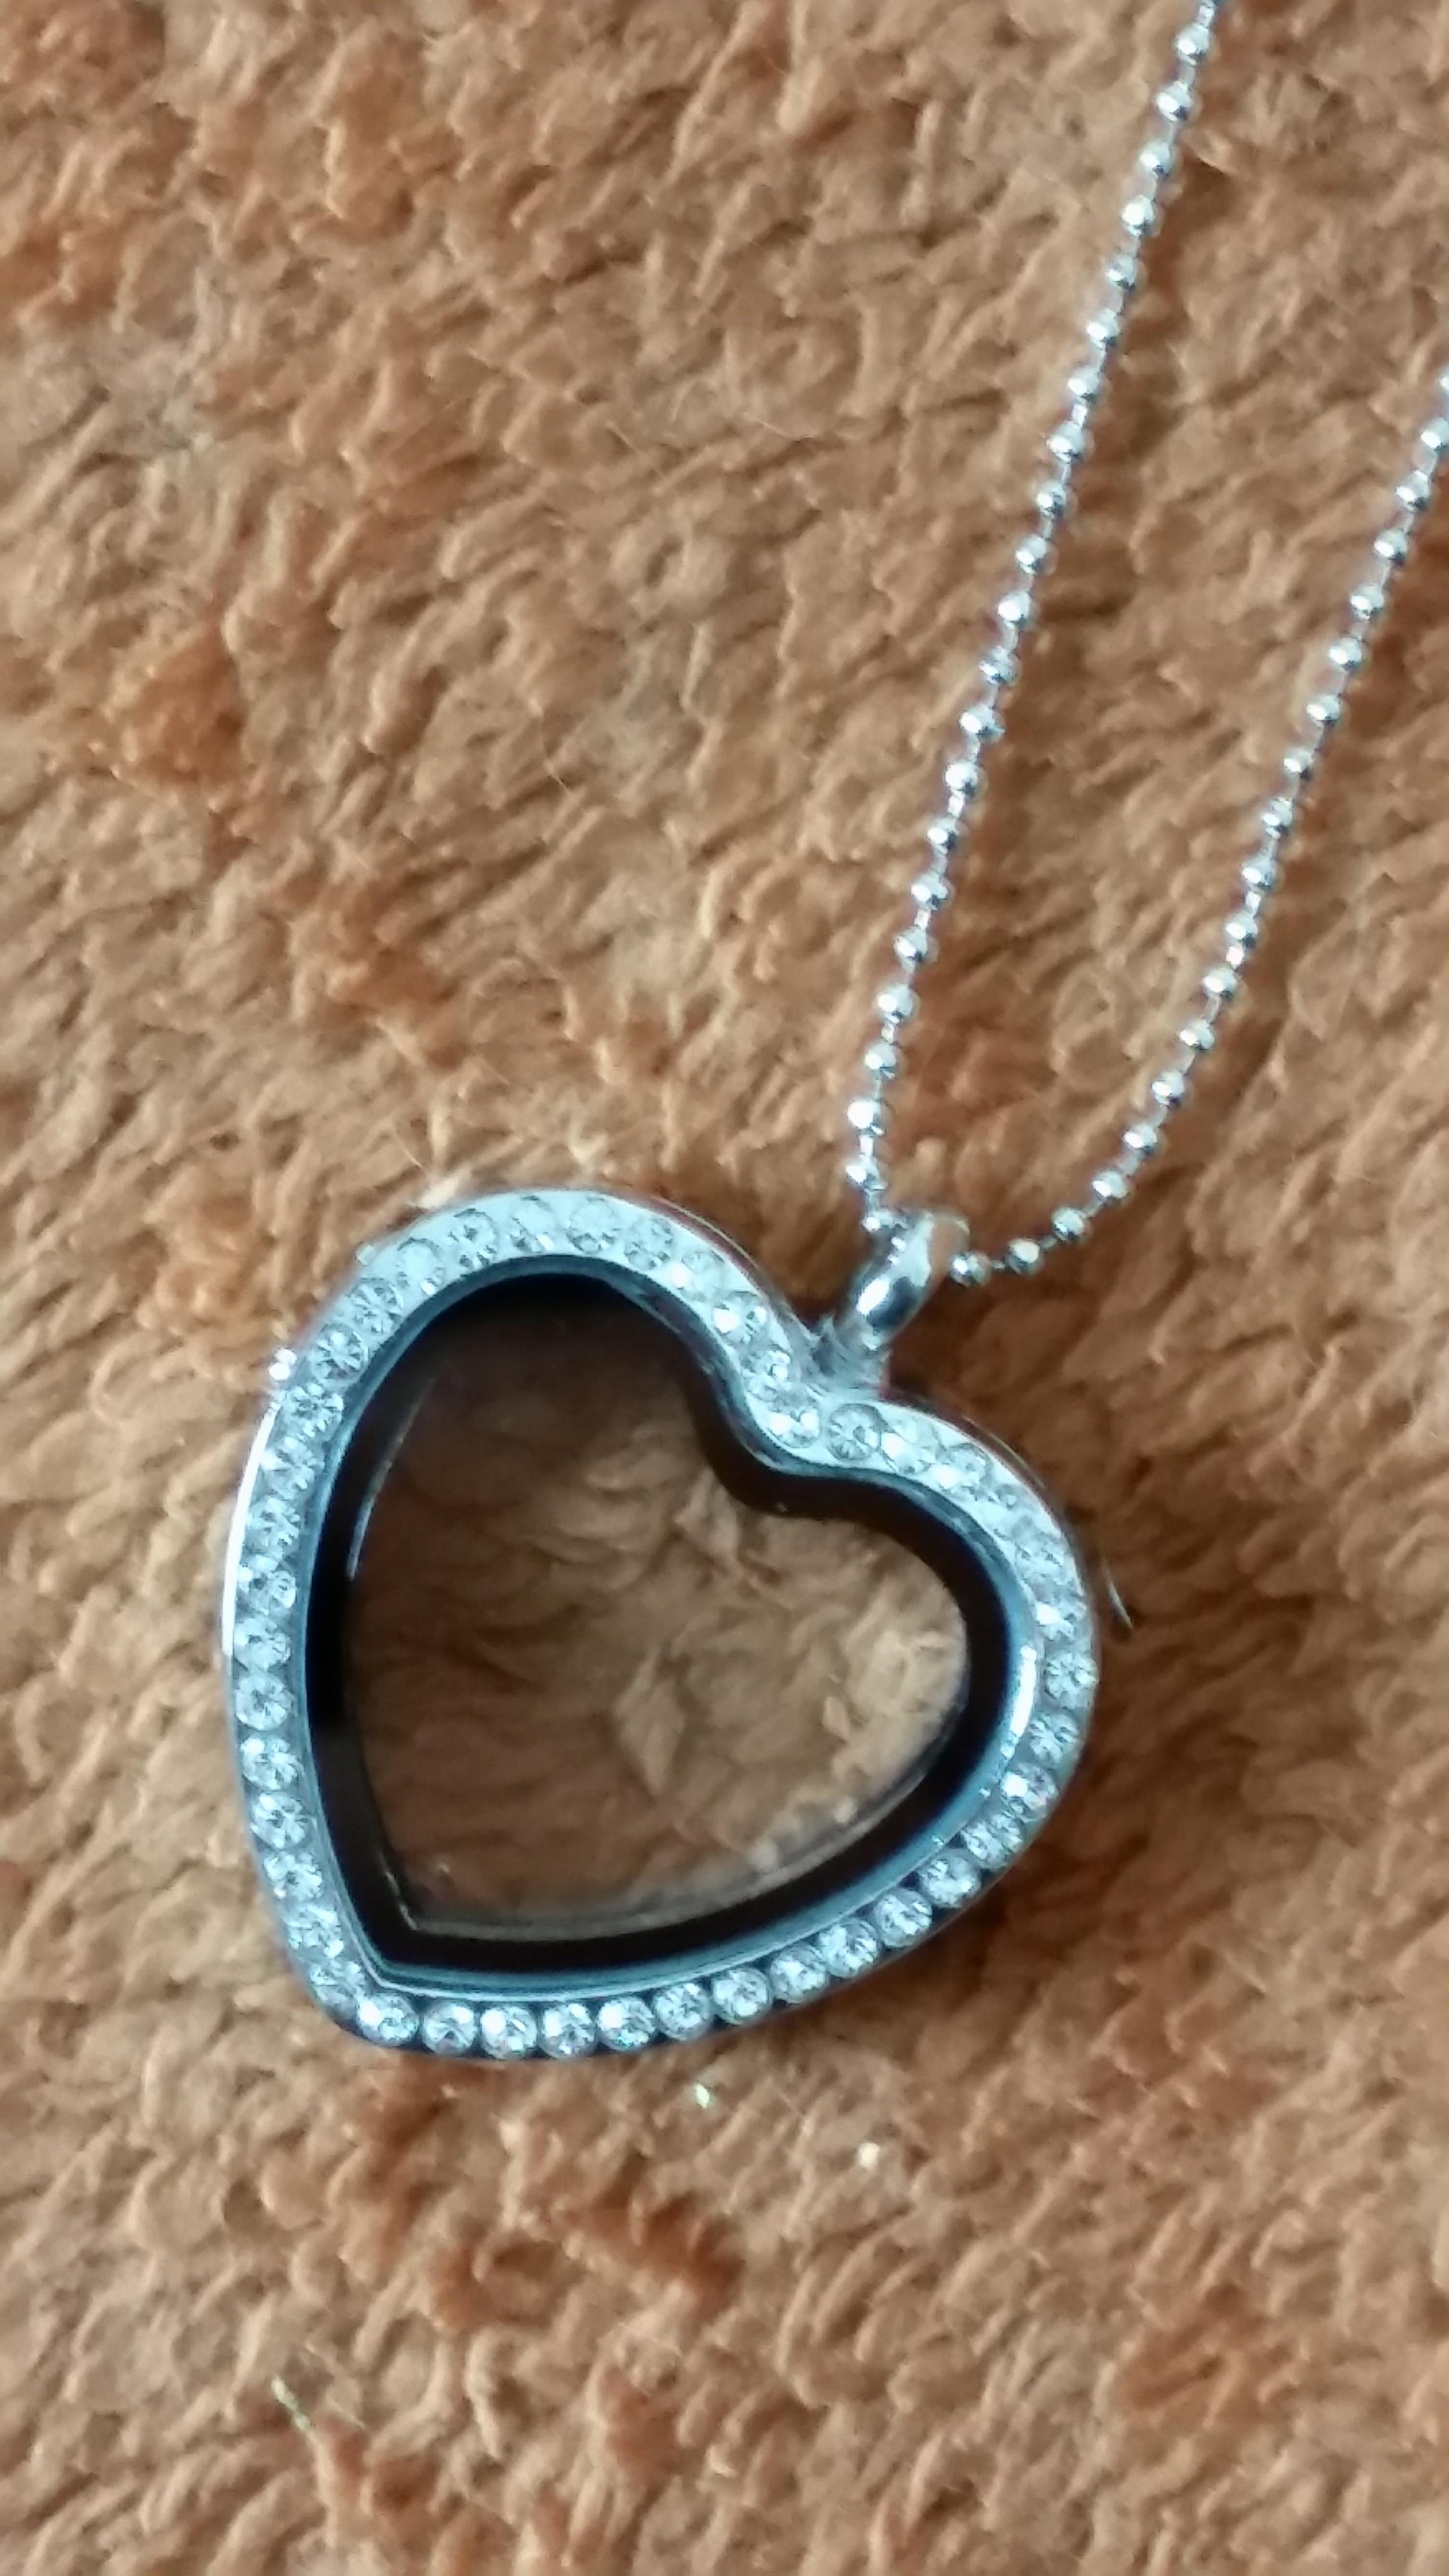 Gorgeous gem stone heart locket with shiny cubic zirconias along the outsides of the heart, customize & personalize it any way that you want!